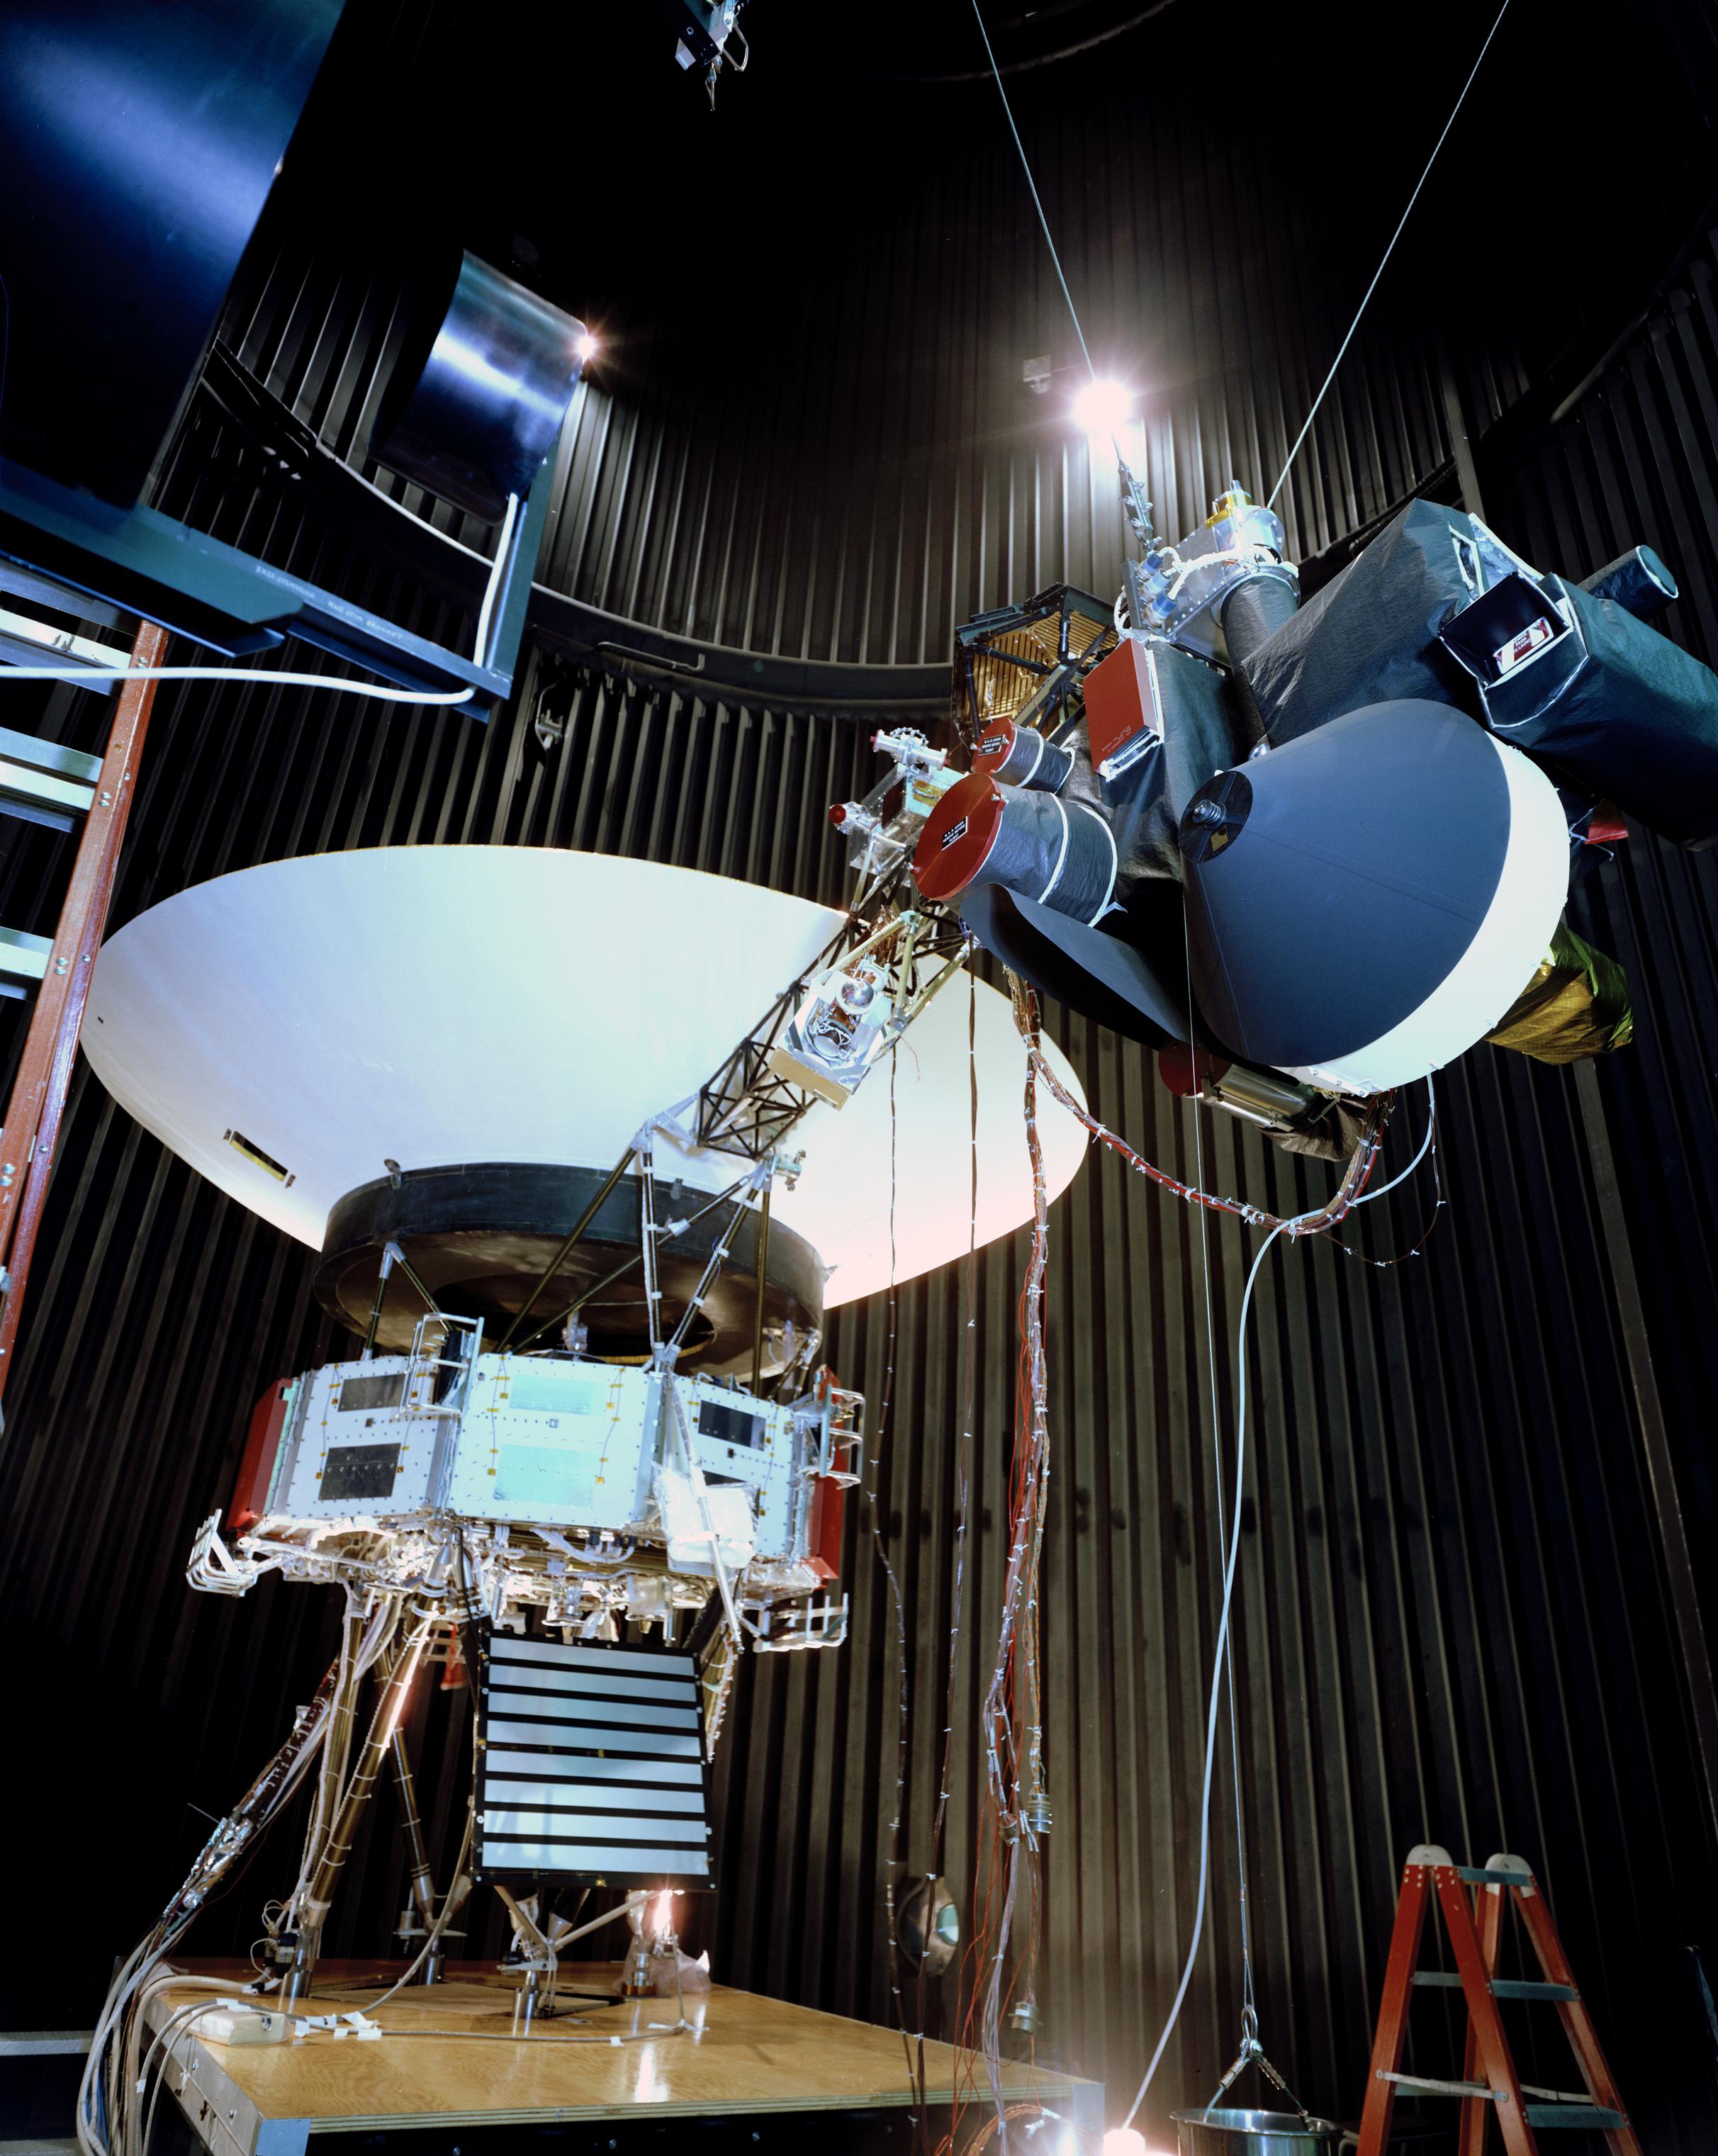 Voyager proof test model in the 25-foot space simulator chamber at NASA's Jet Propulsion Laboratory. The spacecraft is seen here with its scan platform, which holds several of its science instruments, in the deployed position.